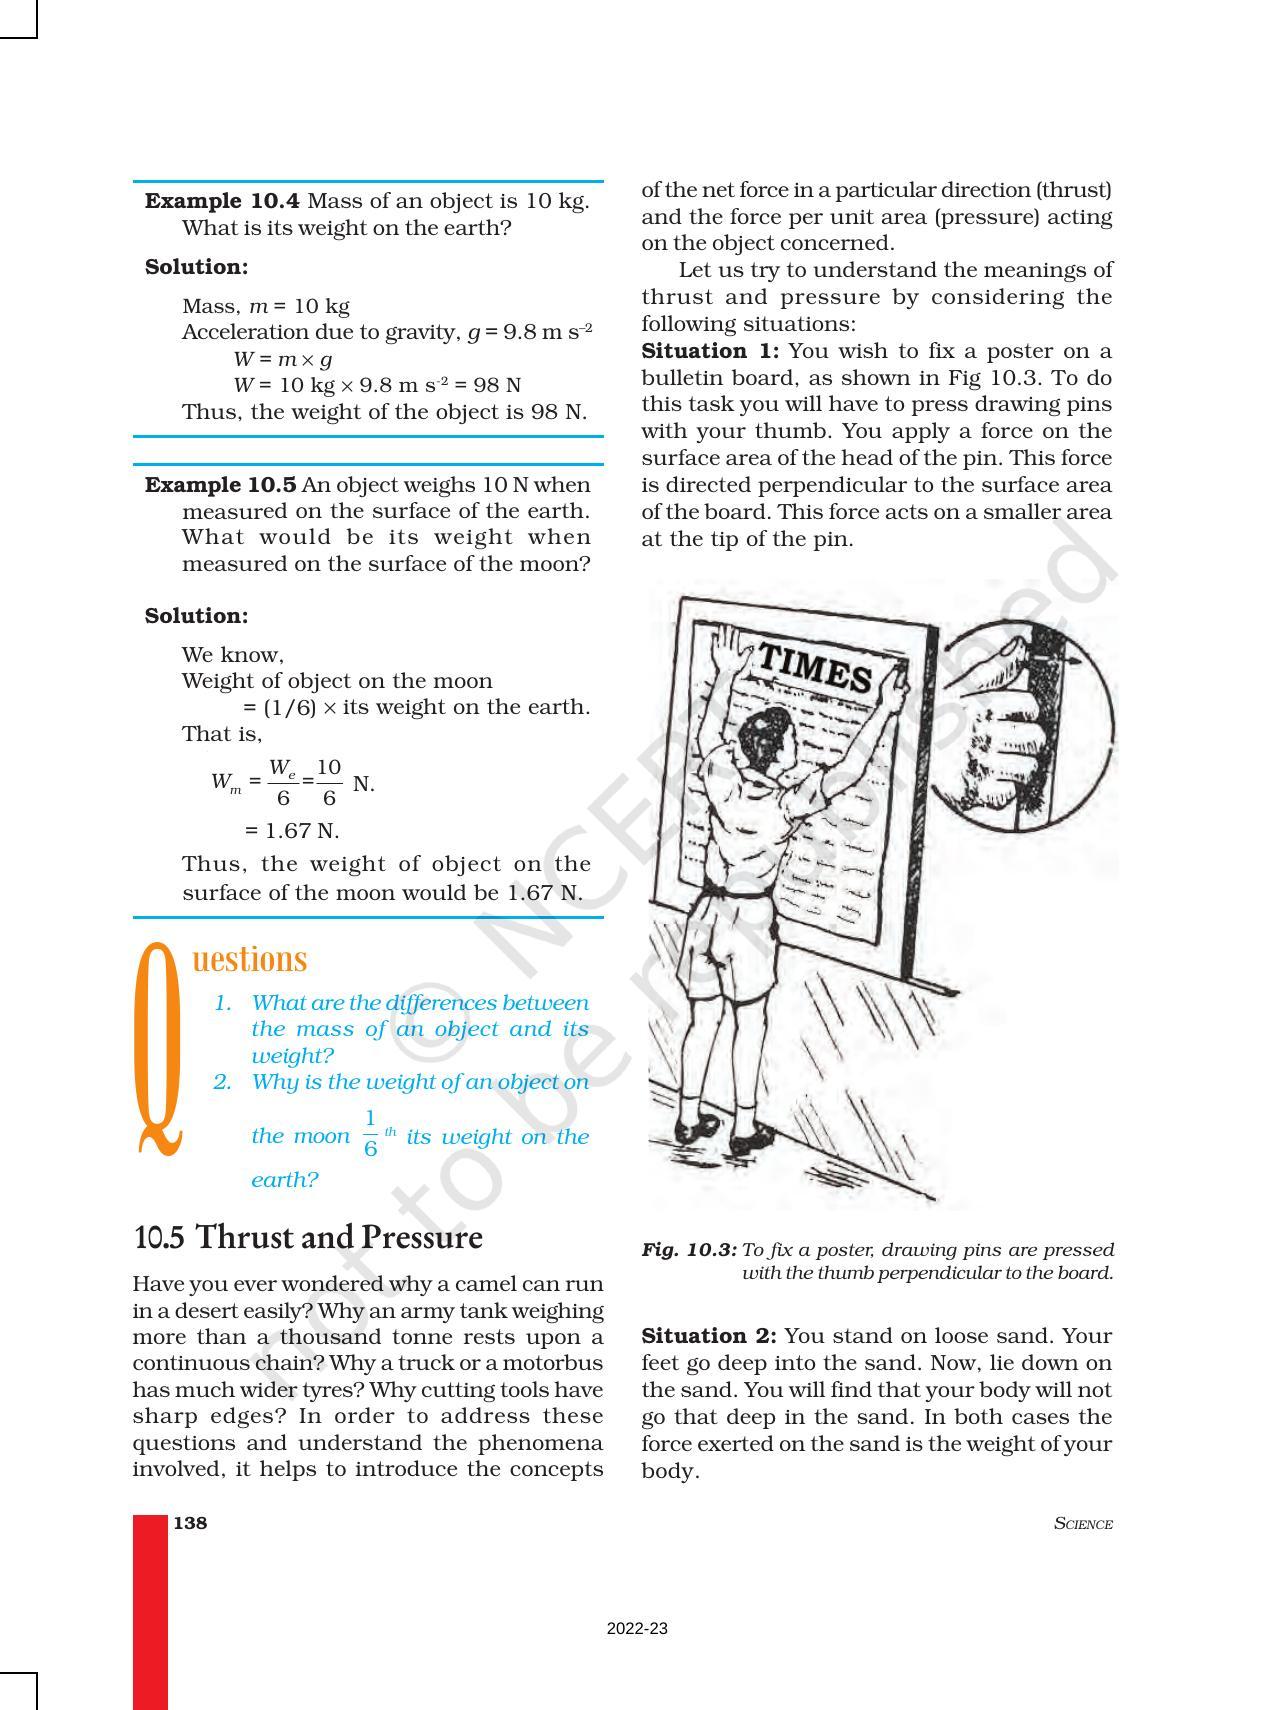 NCERT Book for Class 9 Science Chapter 10 Gravitation - Page 8